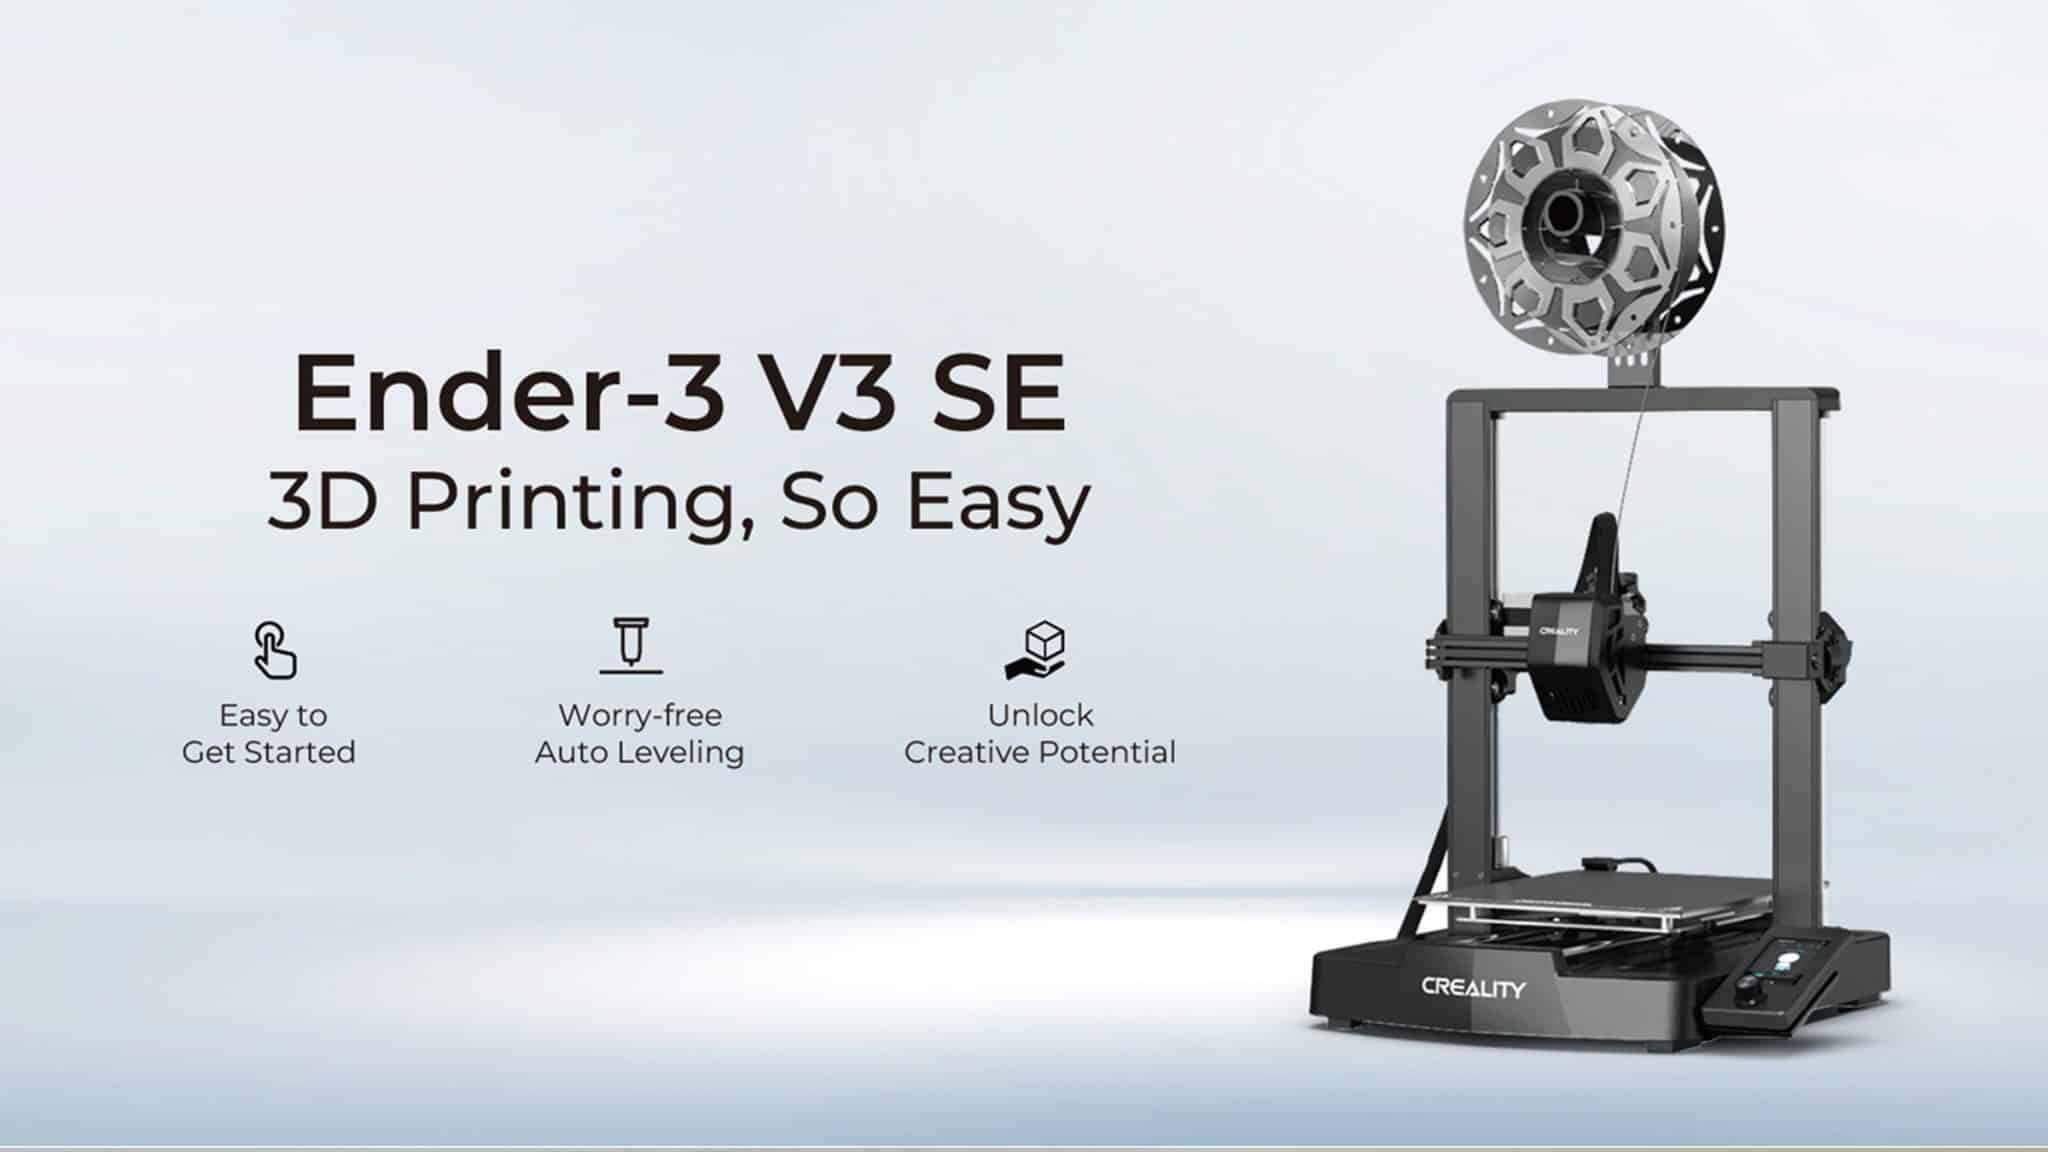 learn-more-about-ender-3-v3-se-release-date-howto3dprint